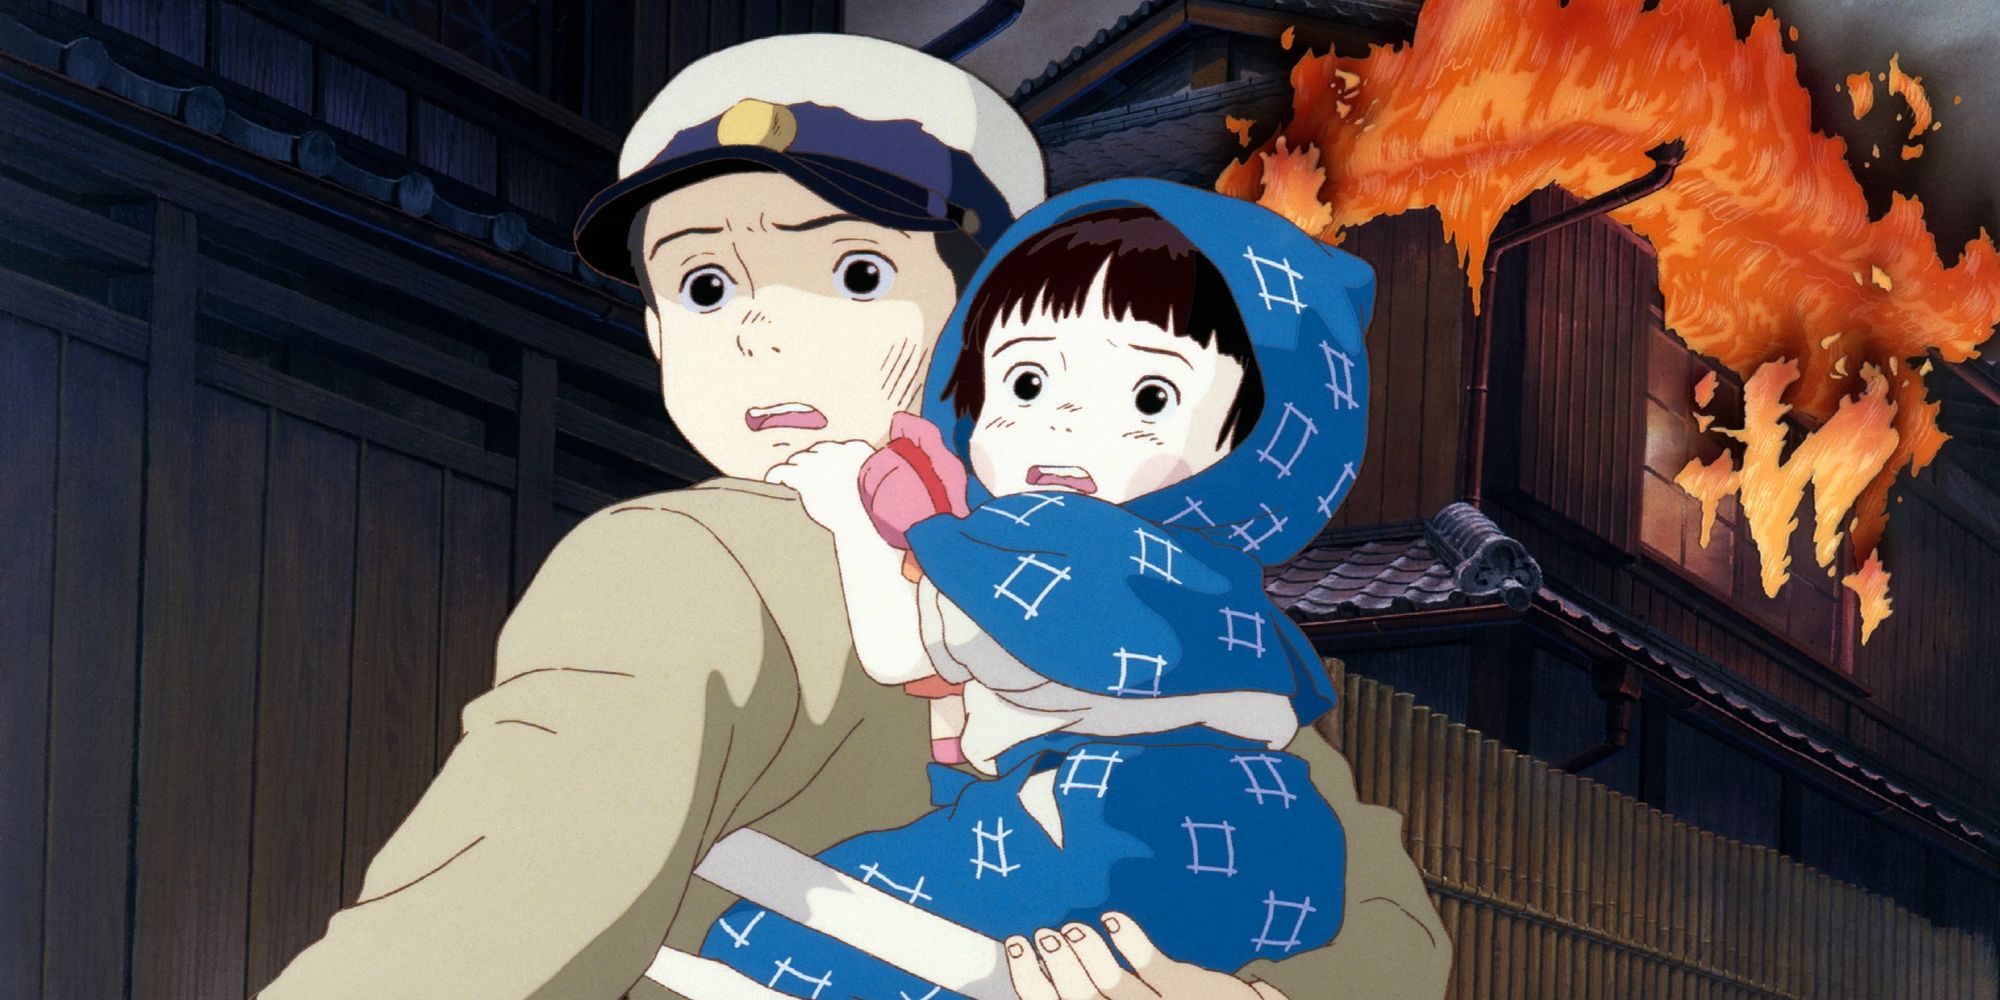 Seita carrying Setsuko, both looking frightened in Grave of the Fireflies